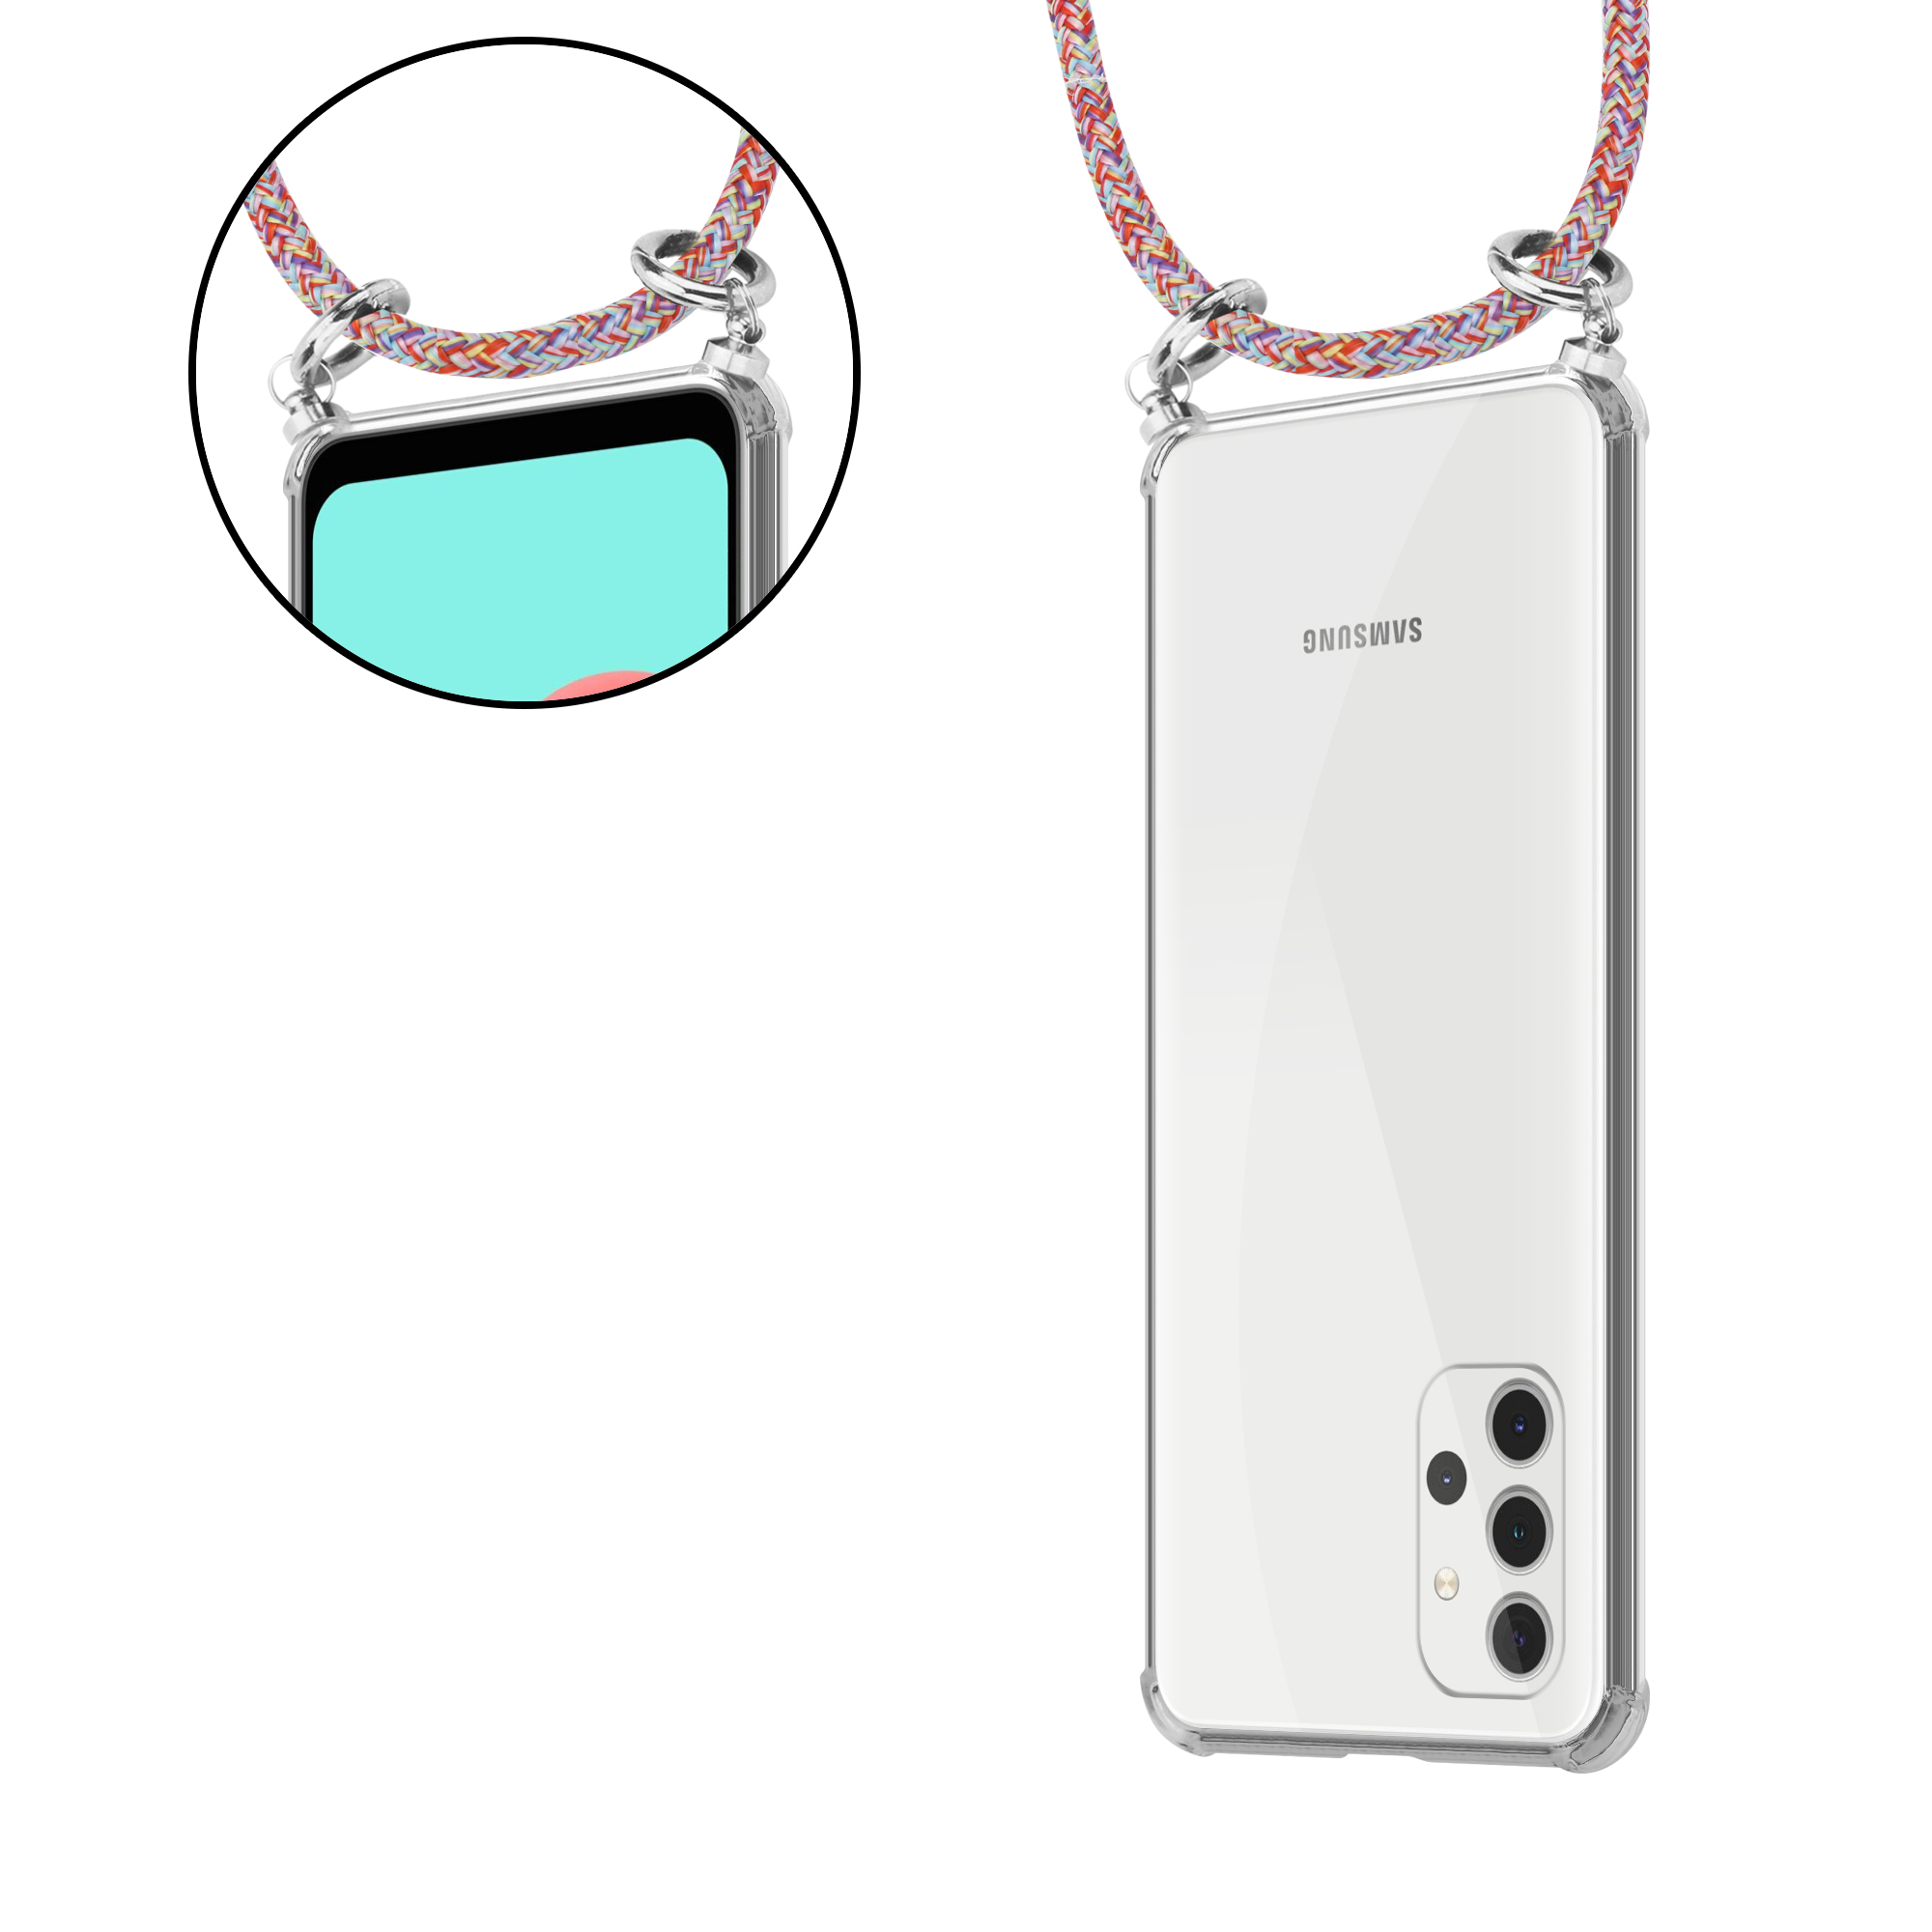 mit Samsung, Backcover, Kette Silber Ringen, COLORFUL 5G, und abnehmbarer Handy Kordel A32 Band PARROT CADORABO Hülle, Galaxy